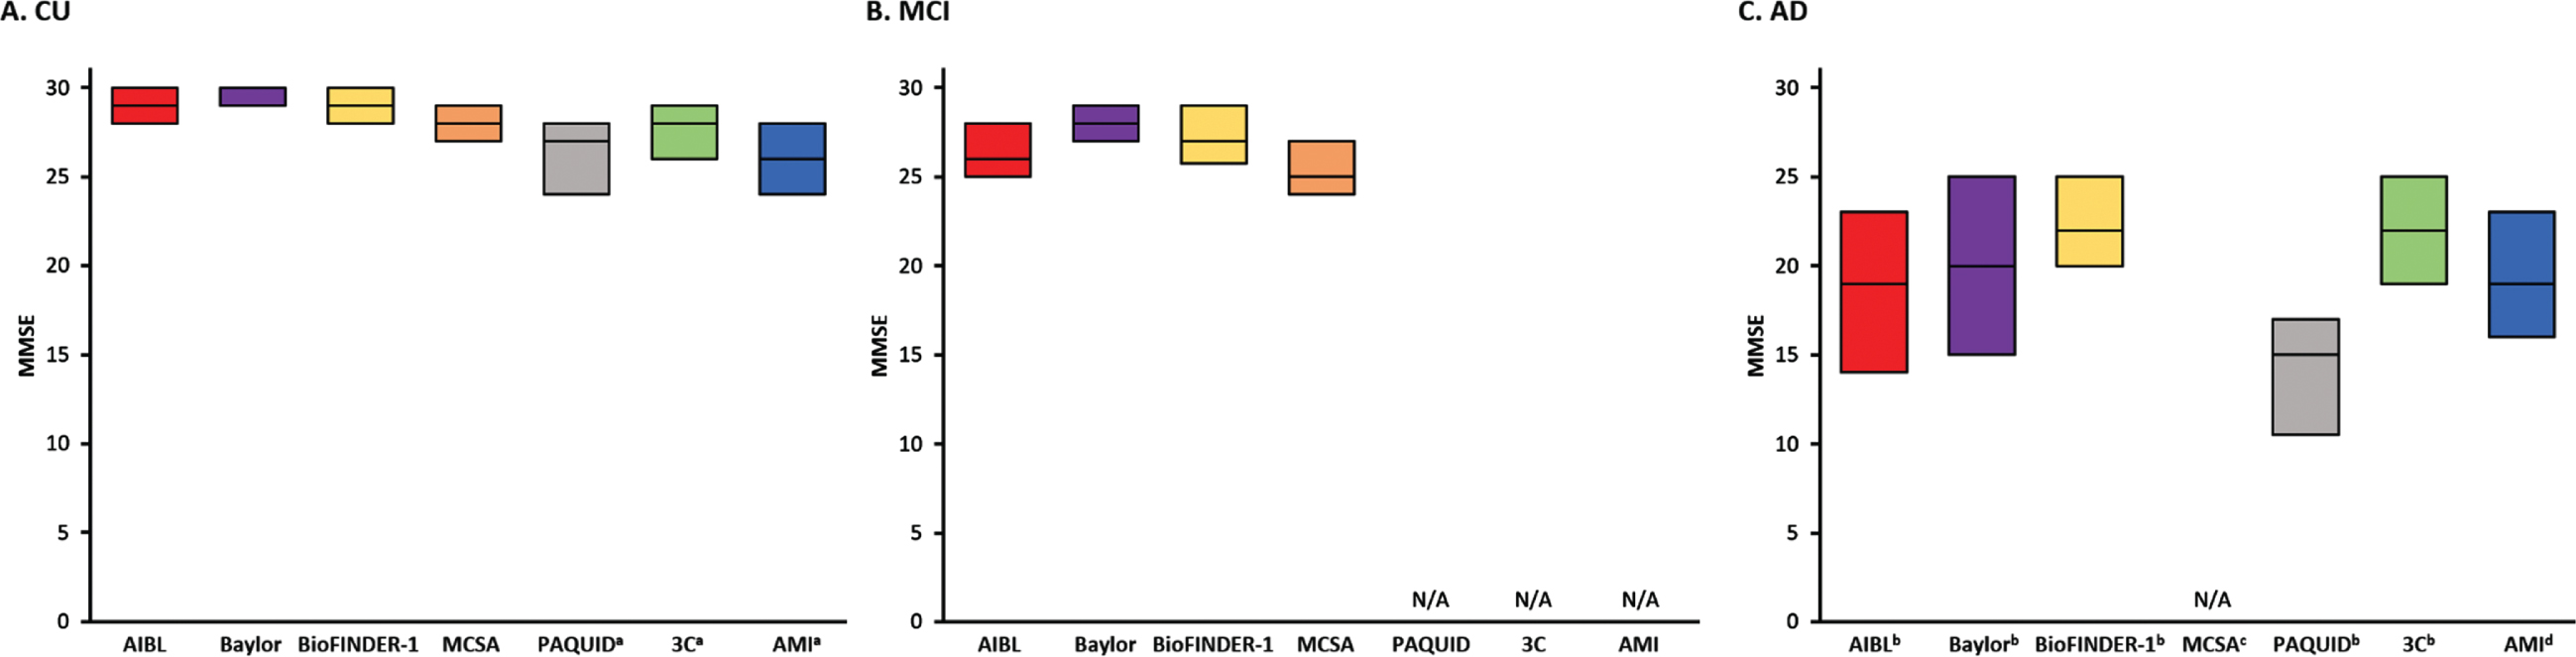 Comparison of baseline MMSE scores across the cohorts in (A) CU, (B) MCI, and (C) AD participants. Note that for population-based cohorts, AD at baseline are prevalent cases, and not incident cases or cases recently referred to a memory clinic. AD, Alzheimer’s disease; AIBL, Australian Imaging, Biomarkers & Lifestyle Flagship Study of Ageing; AMI, AGRICA-MSA-Institut fédératif de recherche en santé publique/Aging Multidisciplinary Investigation; Baylor, Alzheimer’s Disease and Memory Disorders Center at Baylor College of Medicine; BioFINDER-1, Biomarkers For Identifying Neurodegenerative Disorders Early and Reliably; CU, cognitively unimpaired; MCSA, Mayo Clinic Study of Aging; MMSE, Mini-Mental State Examination; ND, no data; PAQUID, Personnes Agées QUID; 3C Bordeaux, Three-City Study. aThe PAQUID, 3C Bordeaux and AMI studies scores are presented of non-demented participants; bThe AIBL, Baylor, and BioFINDER-1, data presented is specific to AD dementia (clinically defined AD or biomarker-confirmed AD; BioFINDER-1 includes AD with other pathologies where AD is the dominant etiology); cMCSA included dementia of any cause; d3C Bordeaux, PAQUID, and AMI included AD or AD plus another form of dementia (with another type of lesion or atypical clinical presentation).